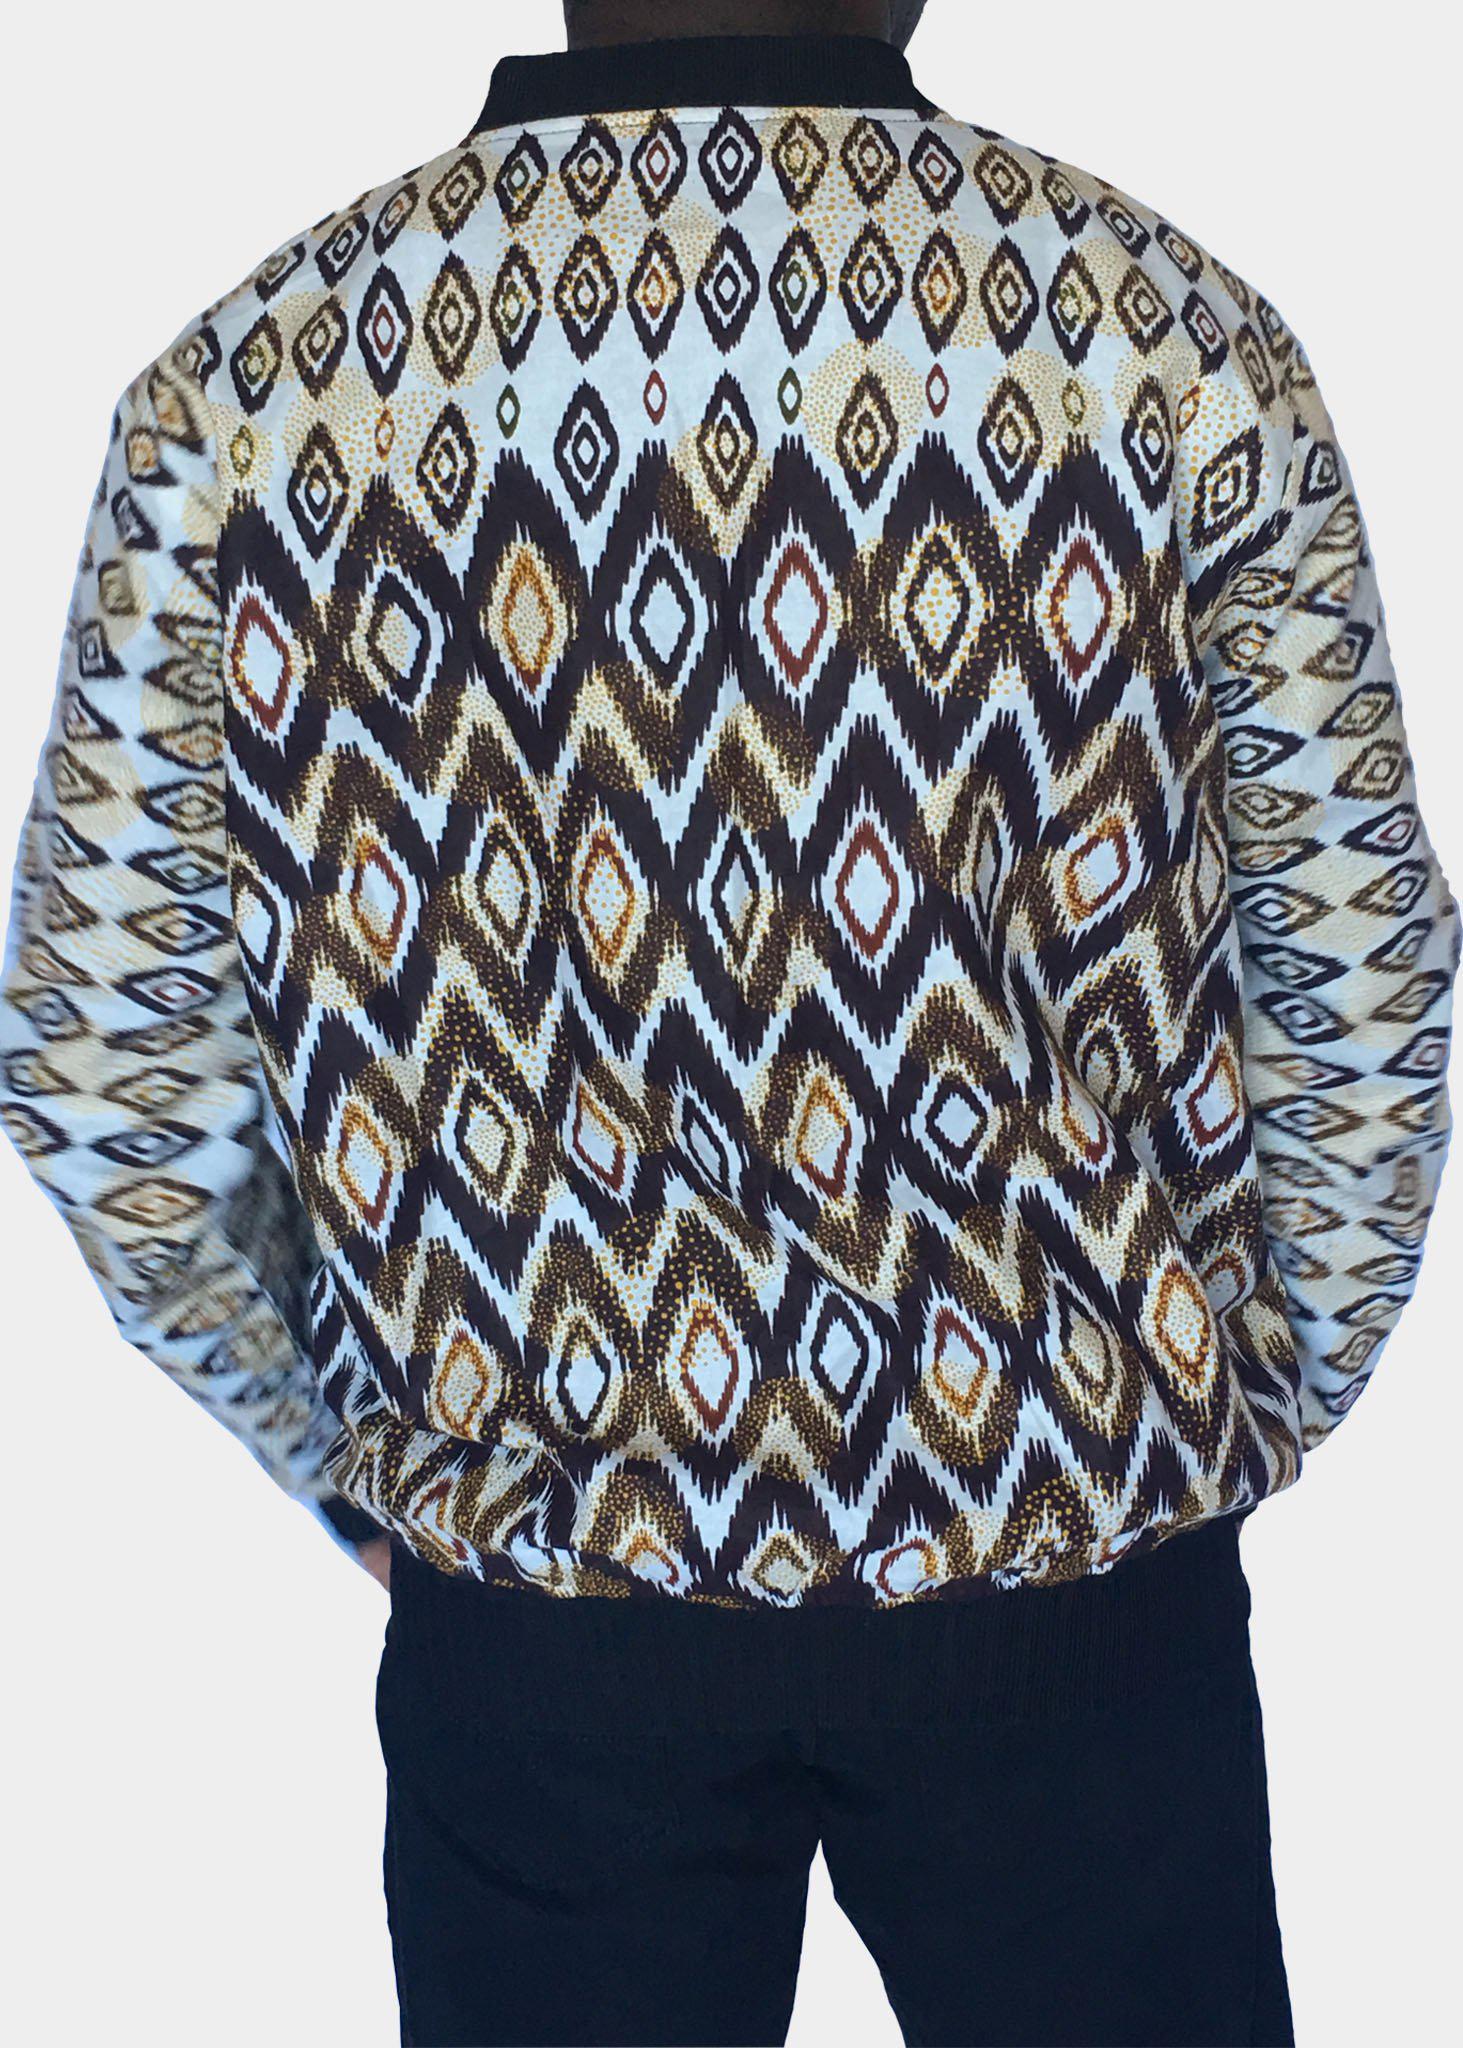 Diamond Shape  White Bomber Jacket -Contemporary and Colorful Ensemble-African apparel and accessories